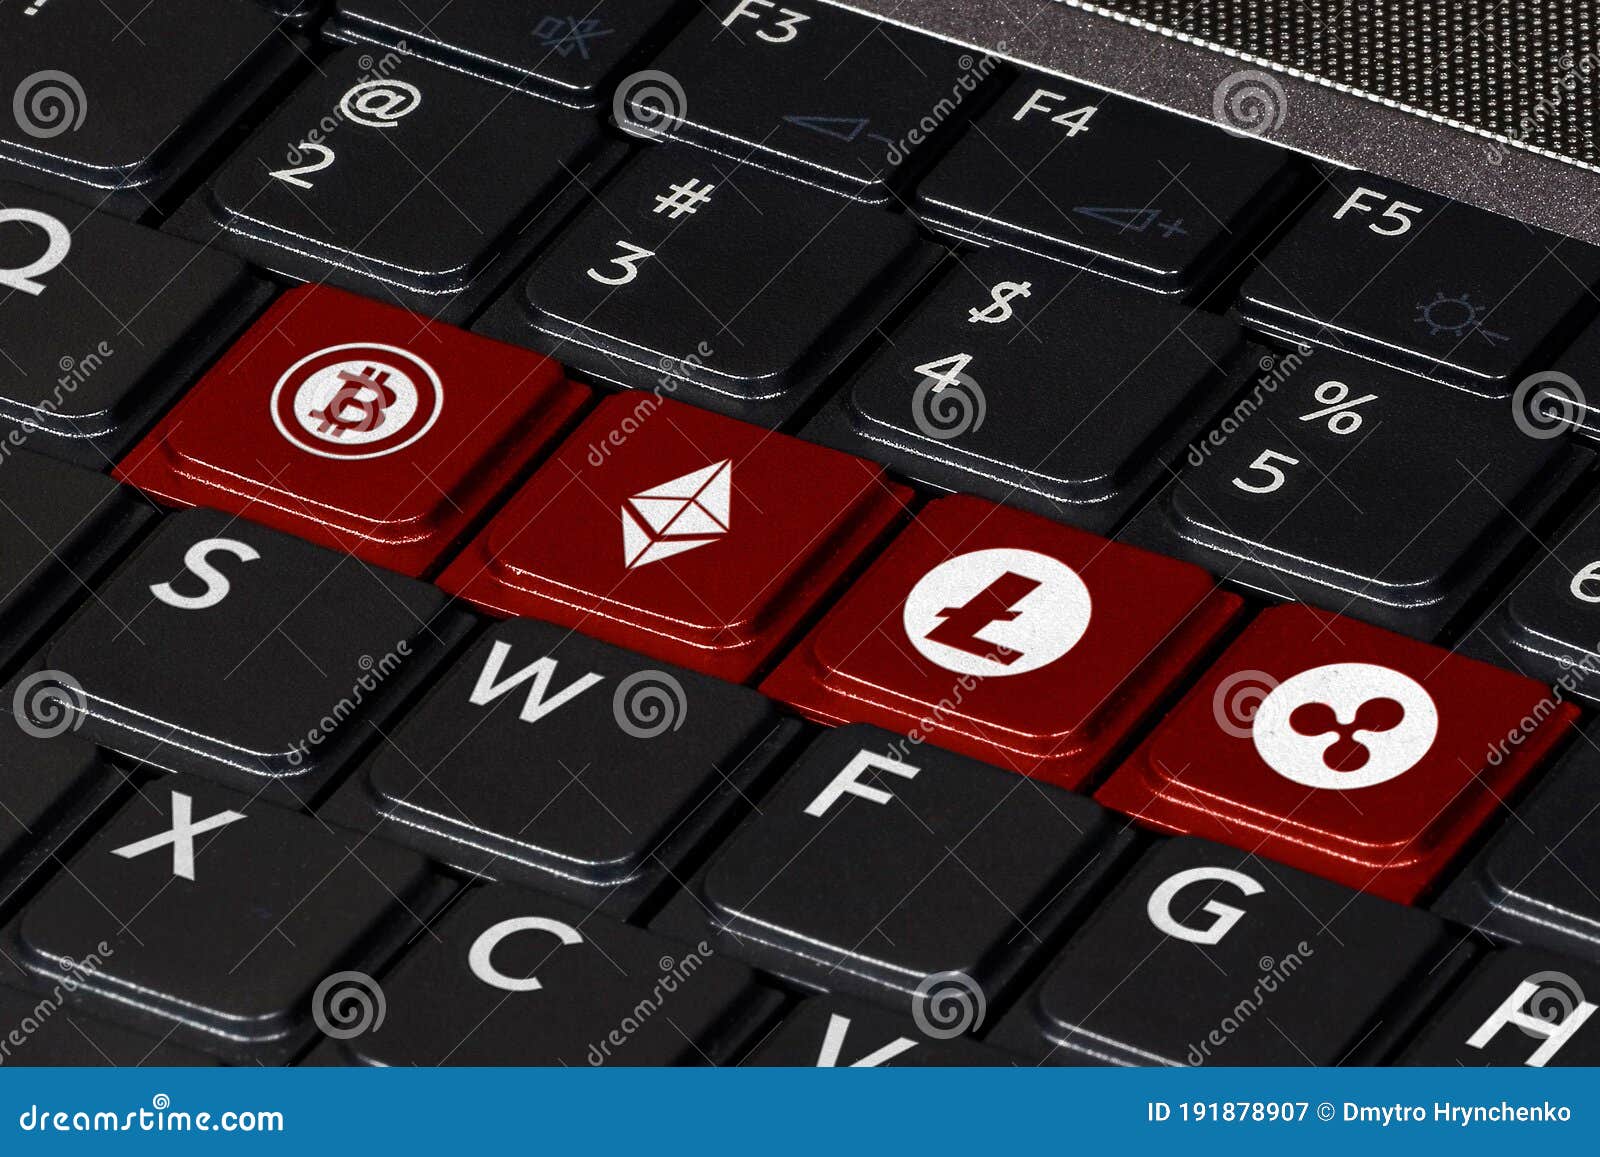 Computer Keyboard With Symbols Of The Most Popular Crypto ...